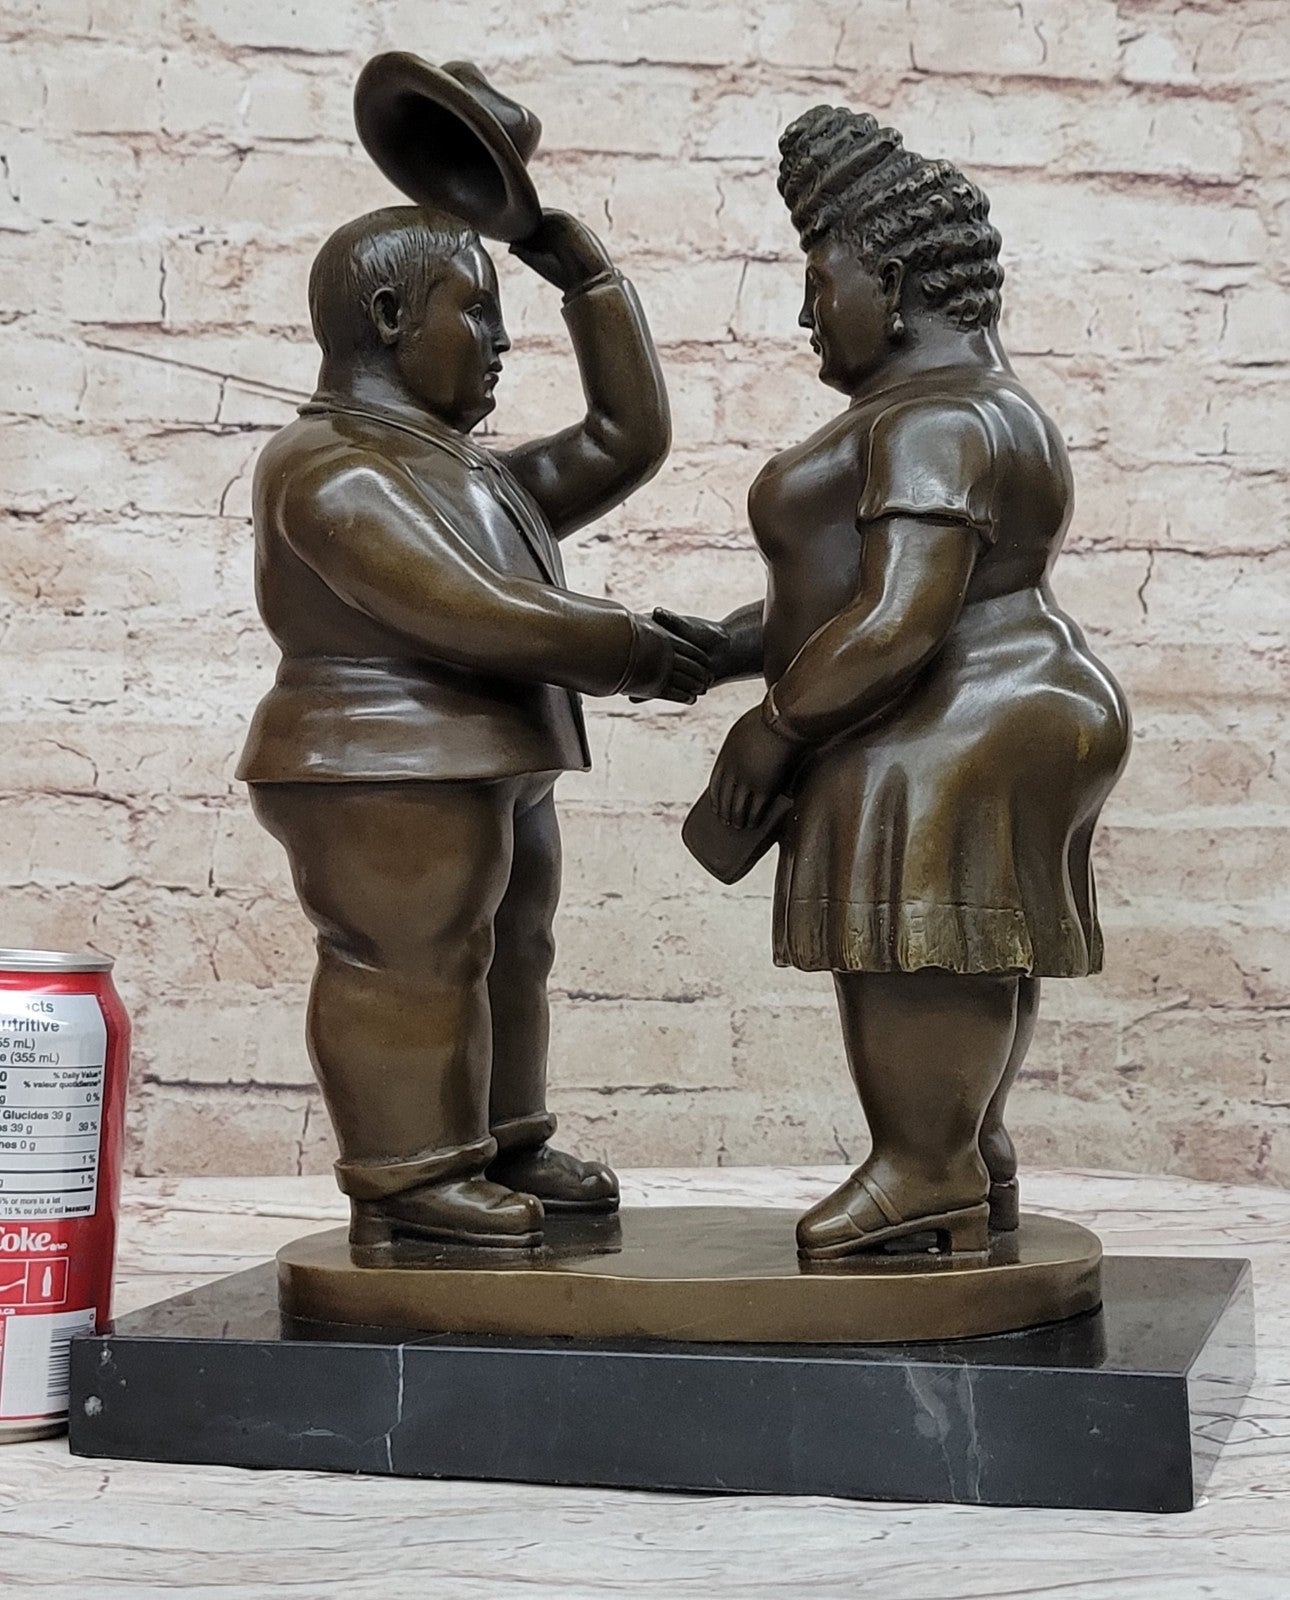 Abstract Modern Art English Man and Woman Bronze Sculpture Signed Botero Figure